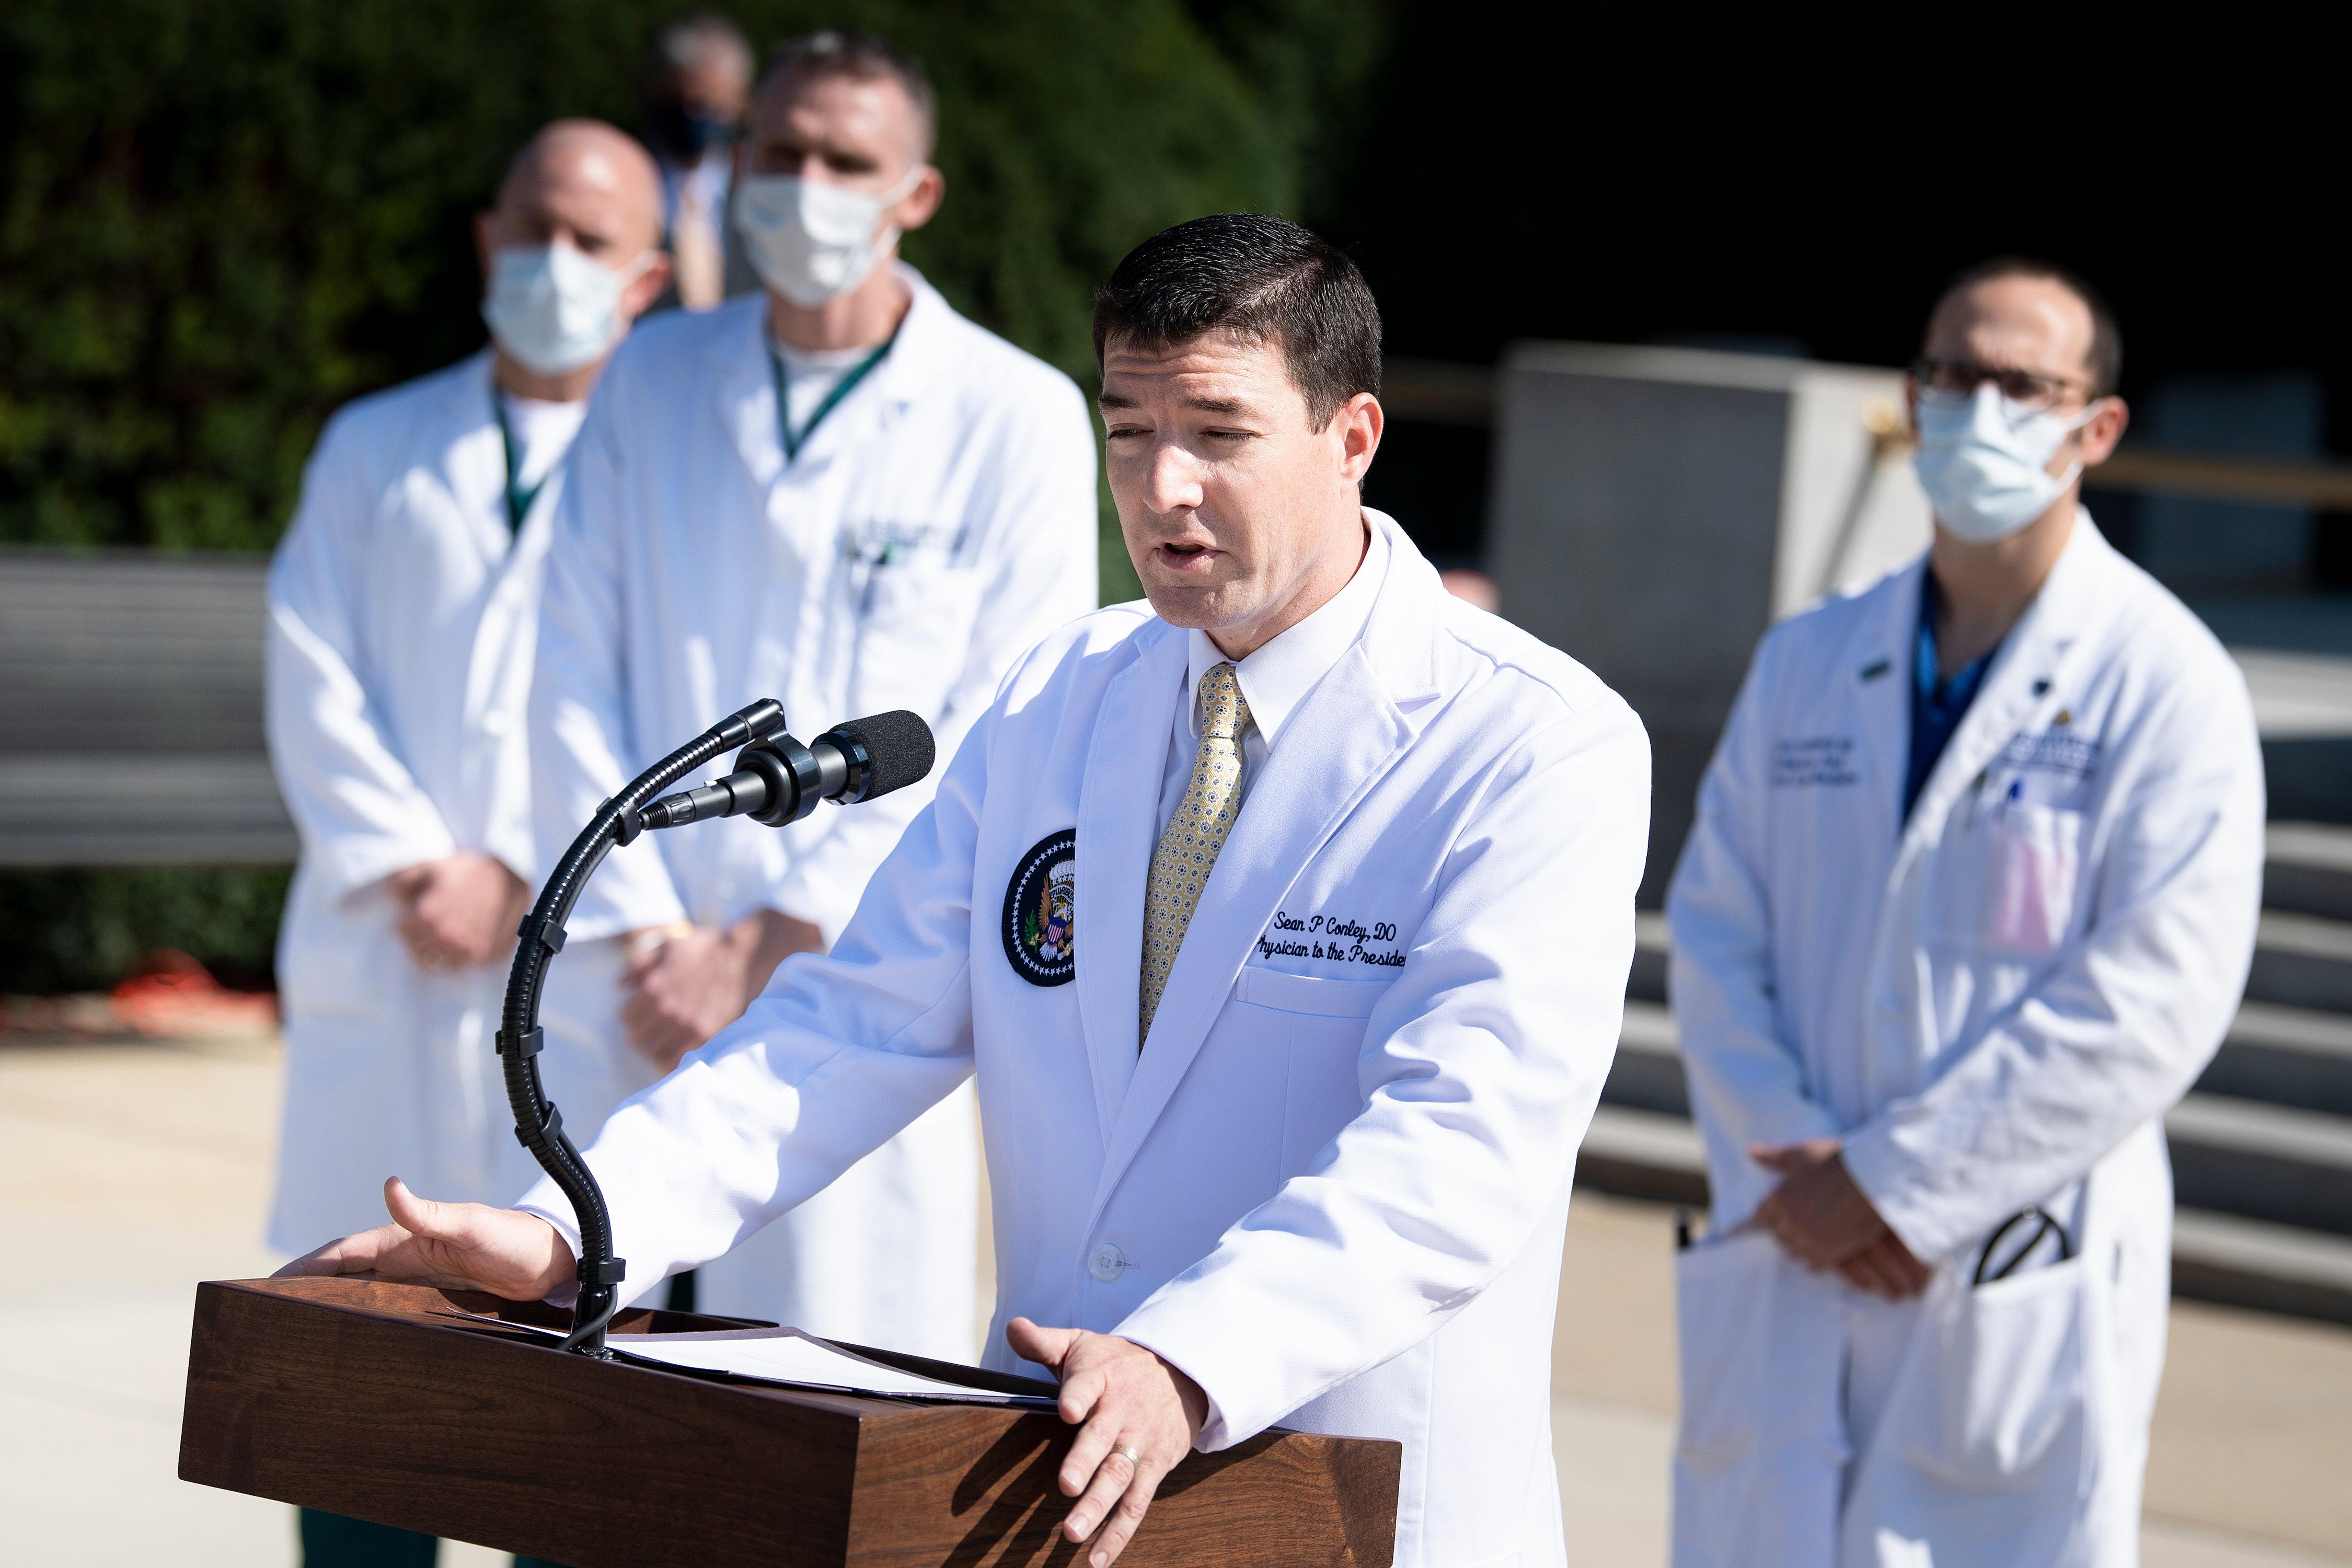 Sean Conley speaks at a lectern. Other doctors wearing masks are seen in the background.